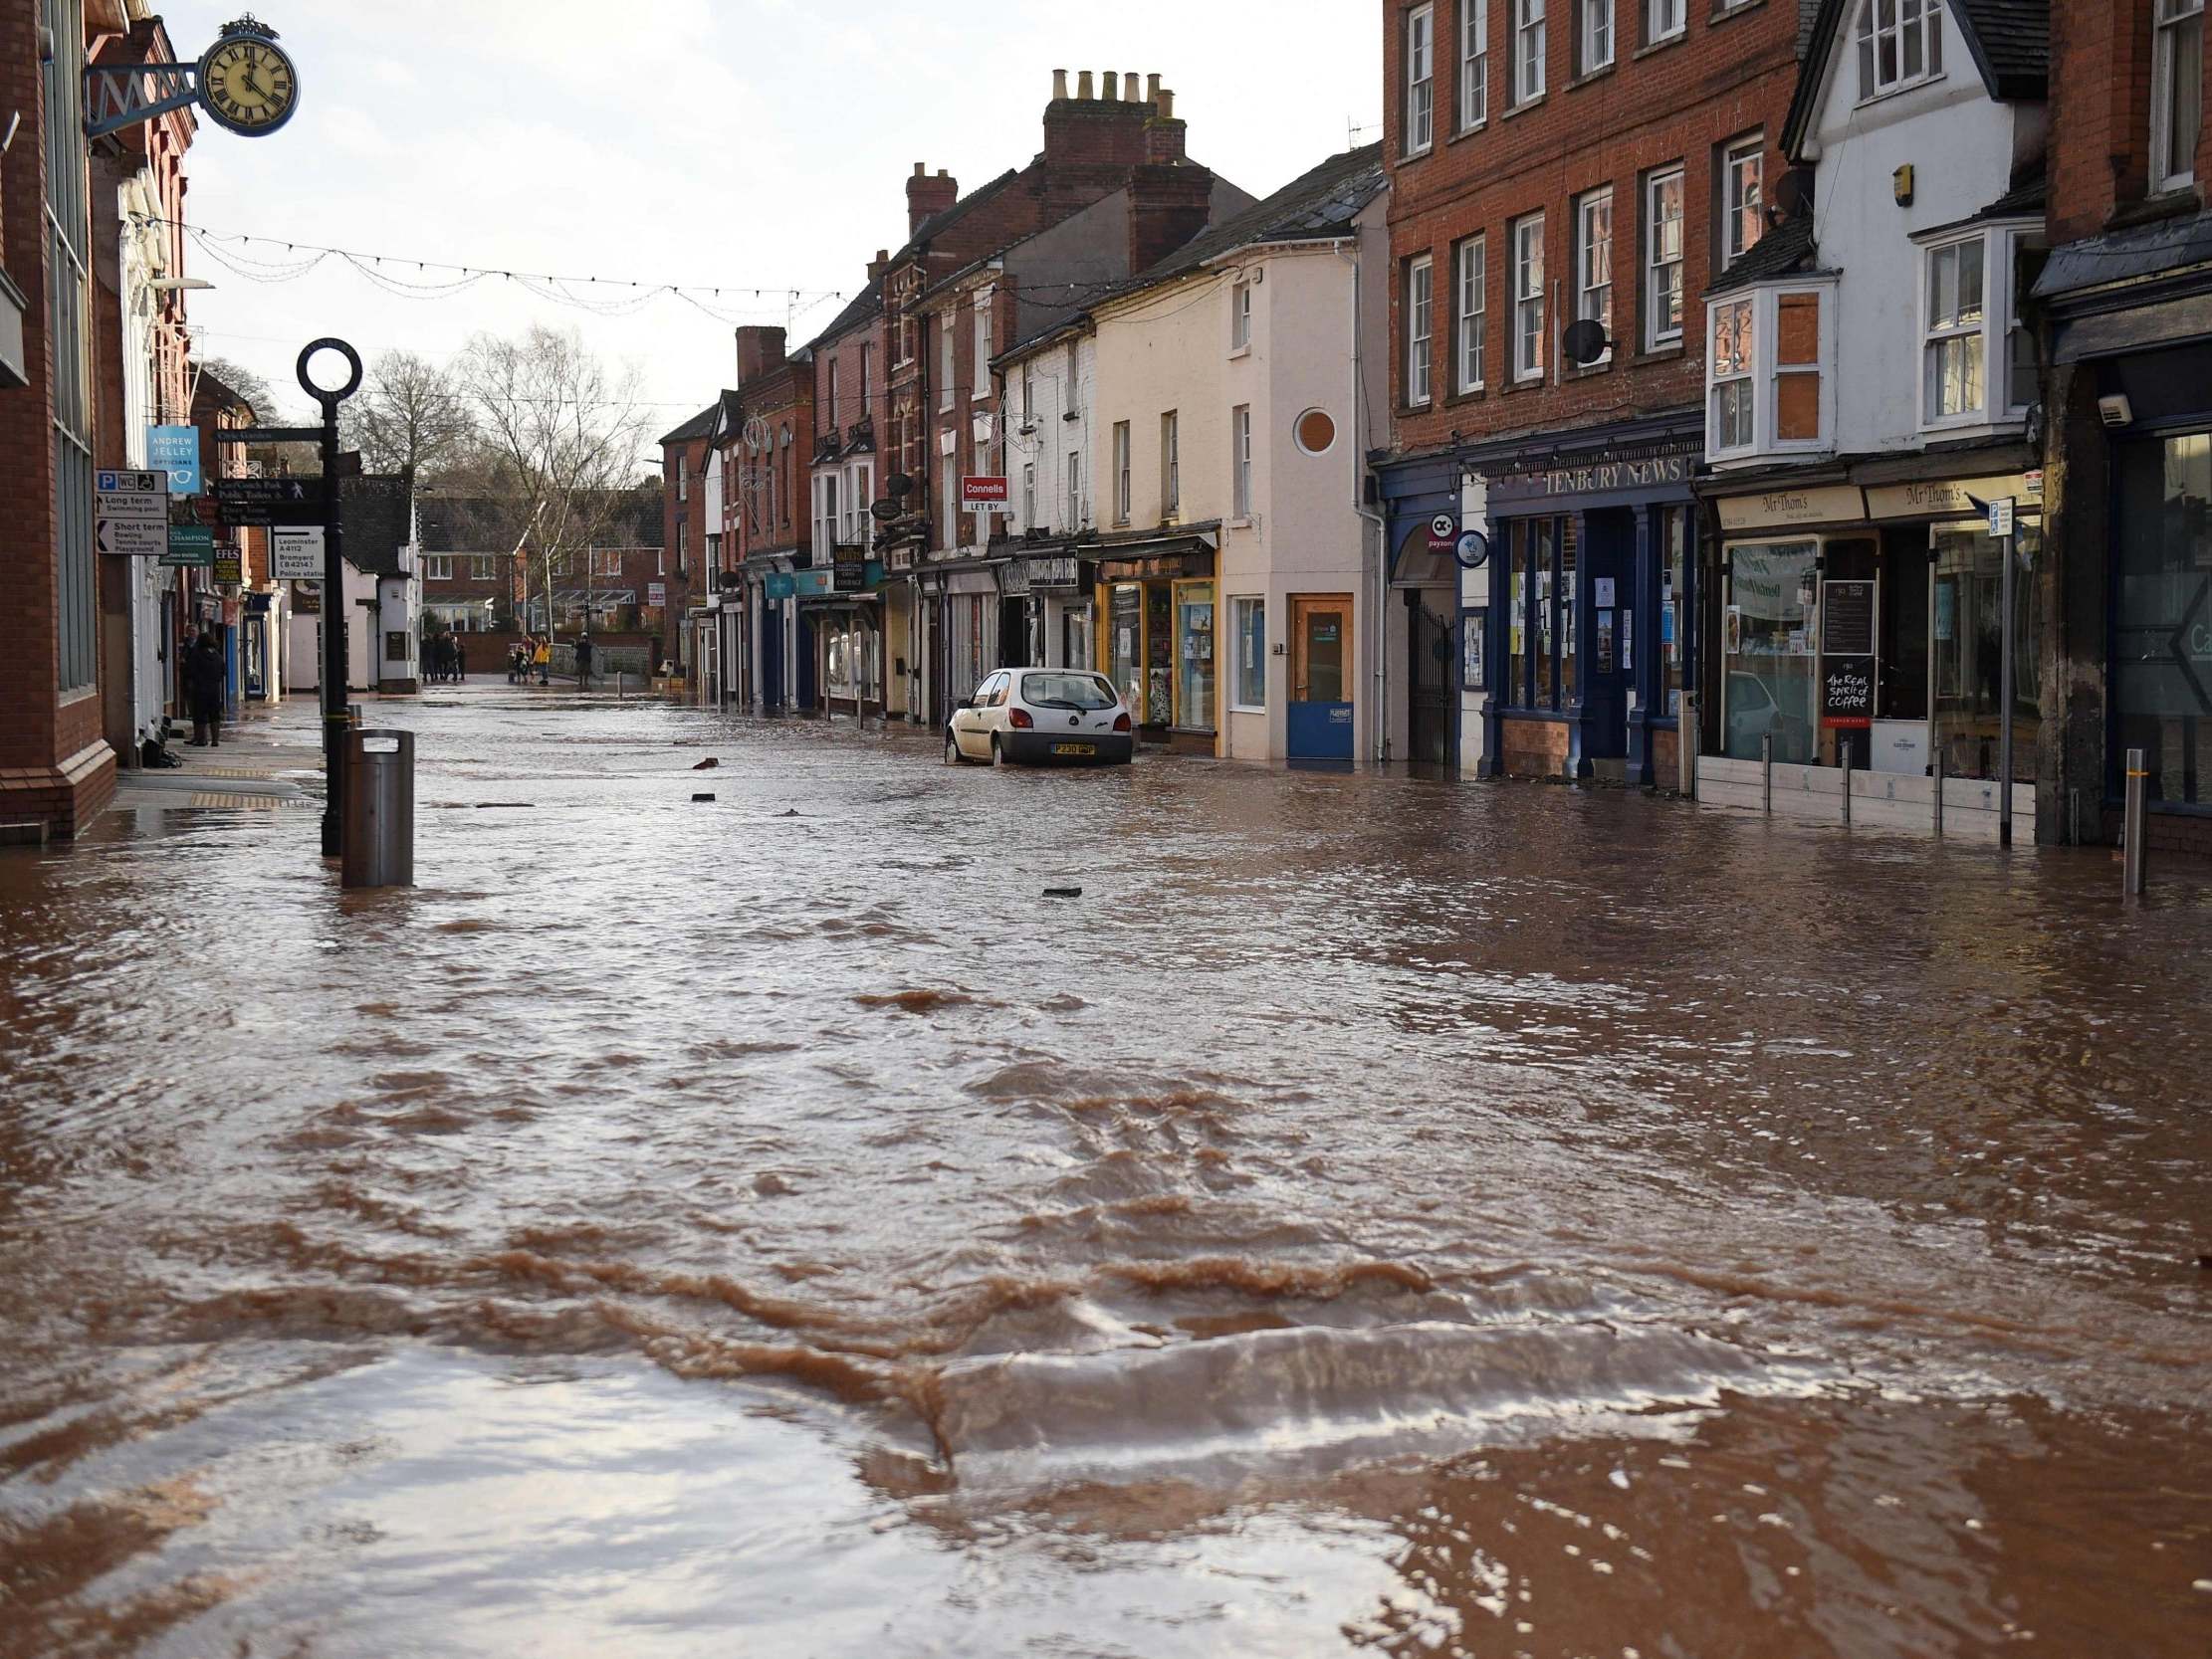 Teme Street in Tenbury Wells, a market town in Worcestershire, is seen under floodwater from the overflowing River Teme amid Storm Dennis